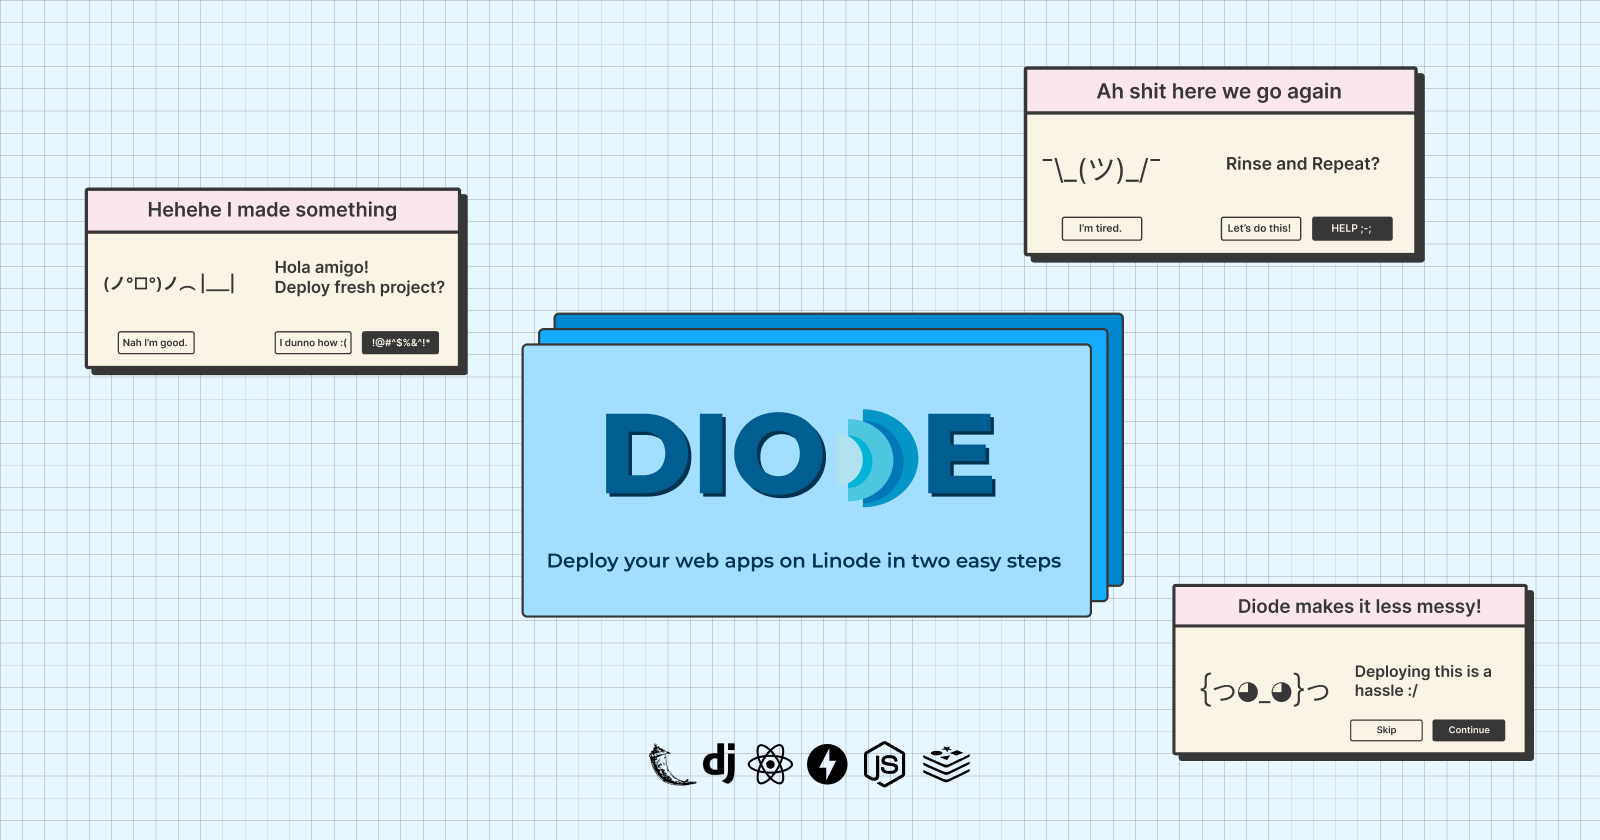 Introducing Diode: Easily deploy your web apps in two steps 🚀